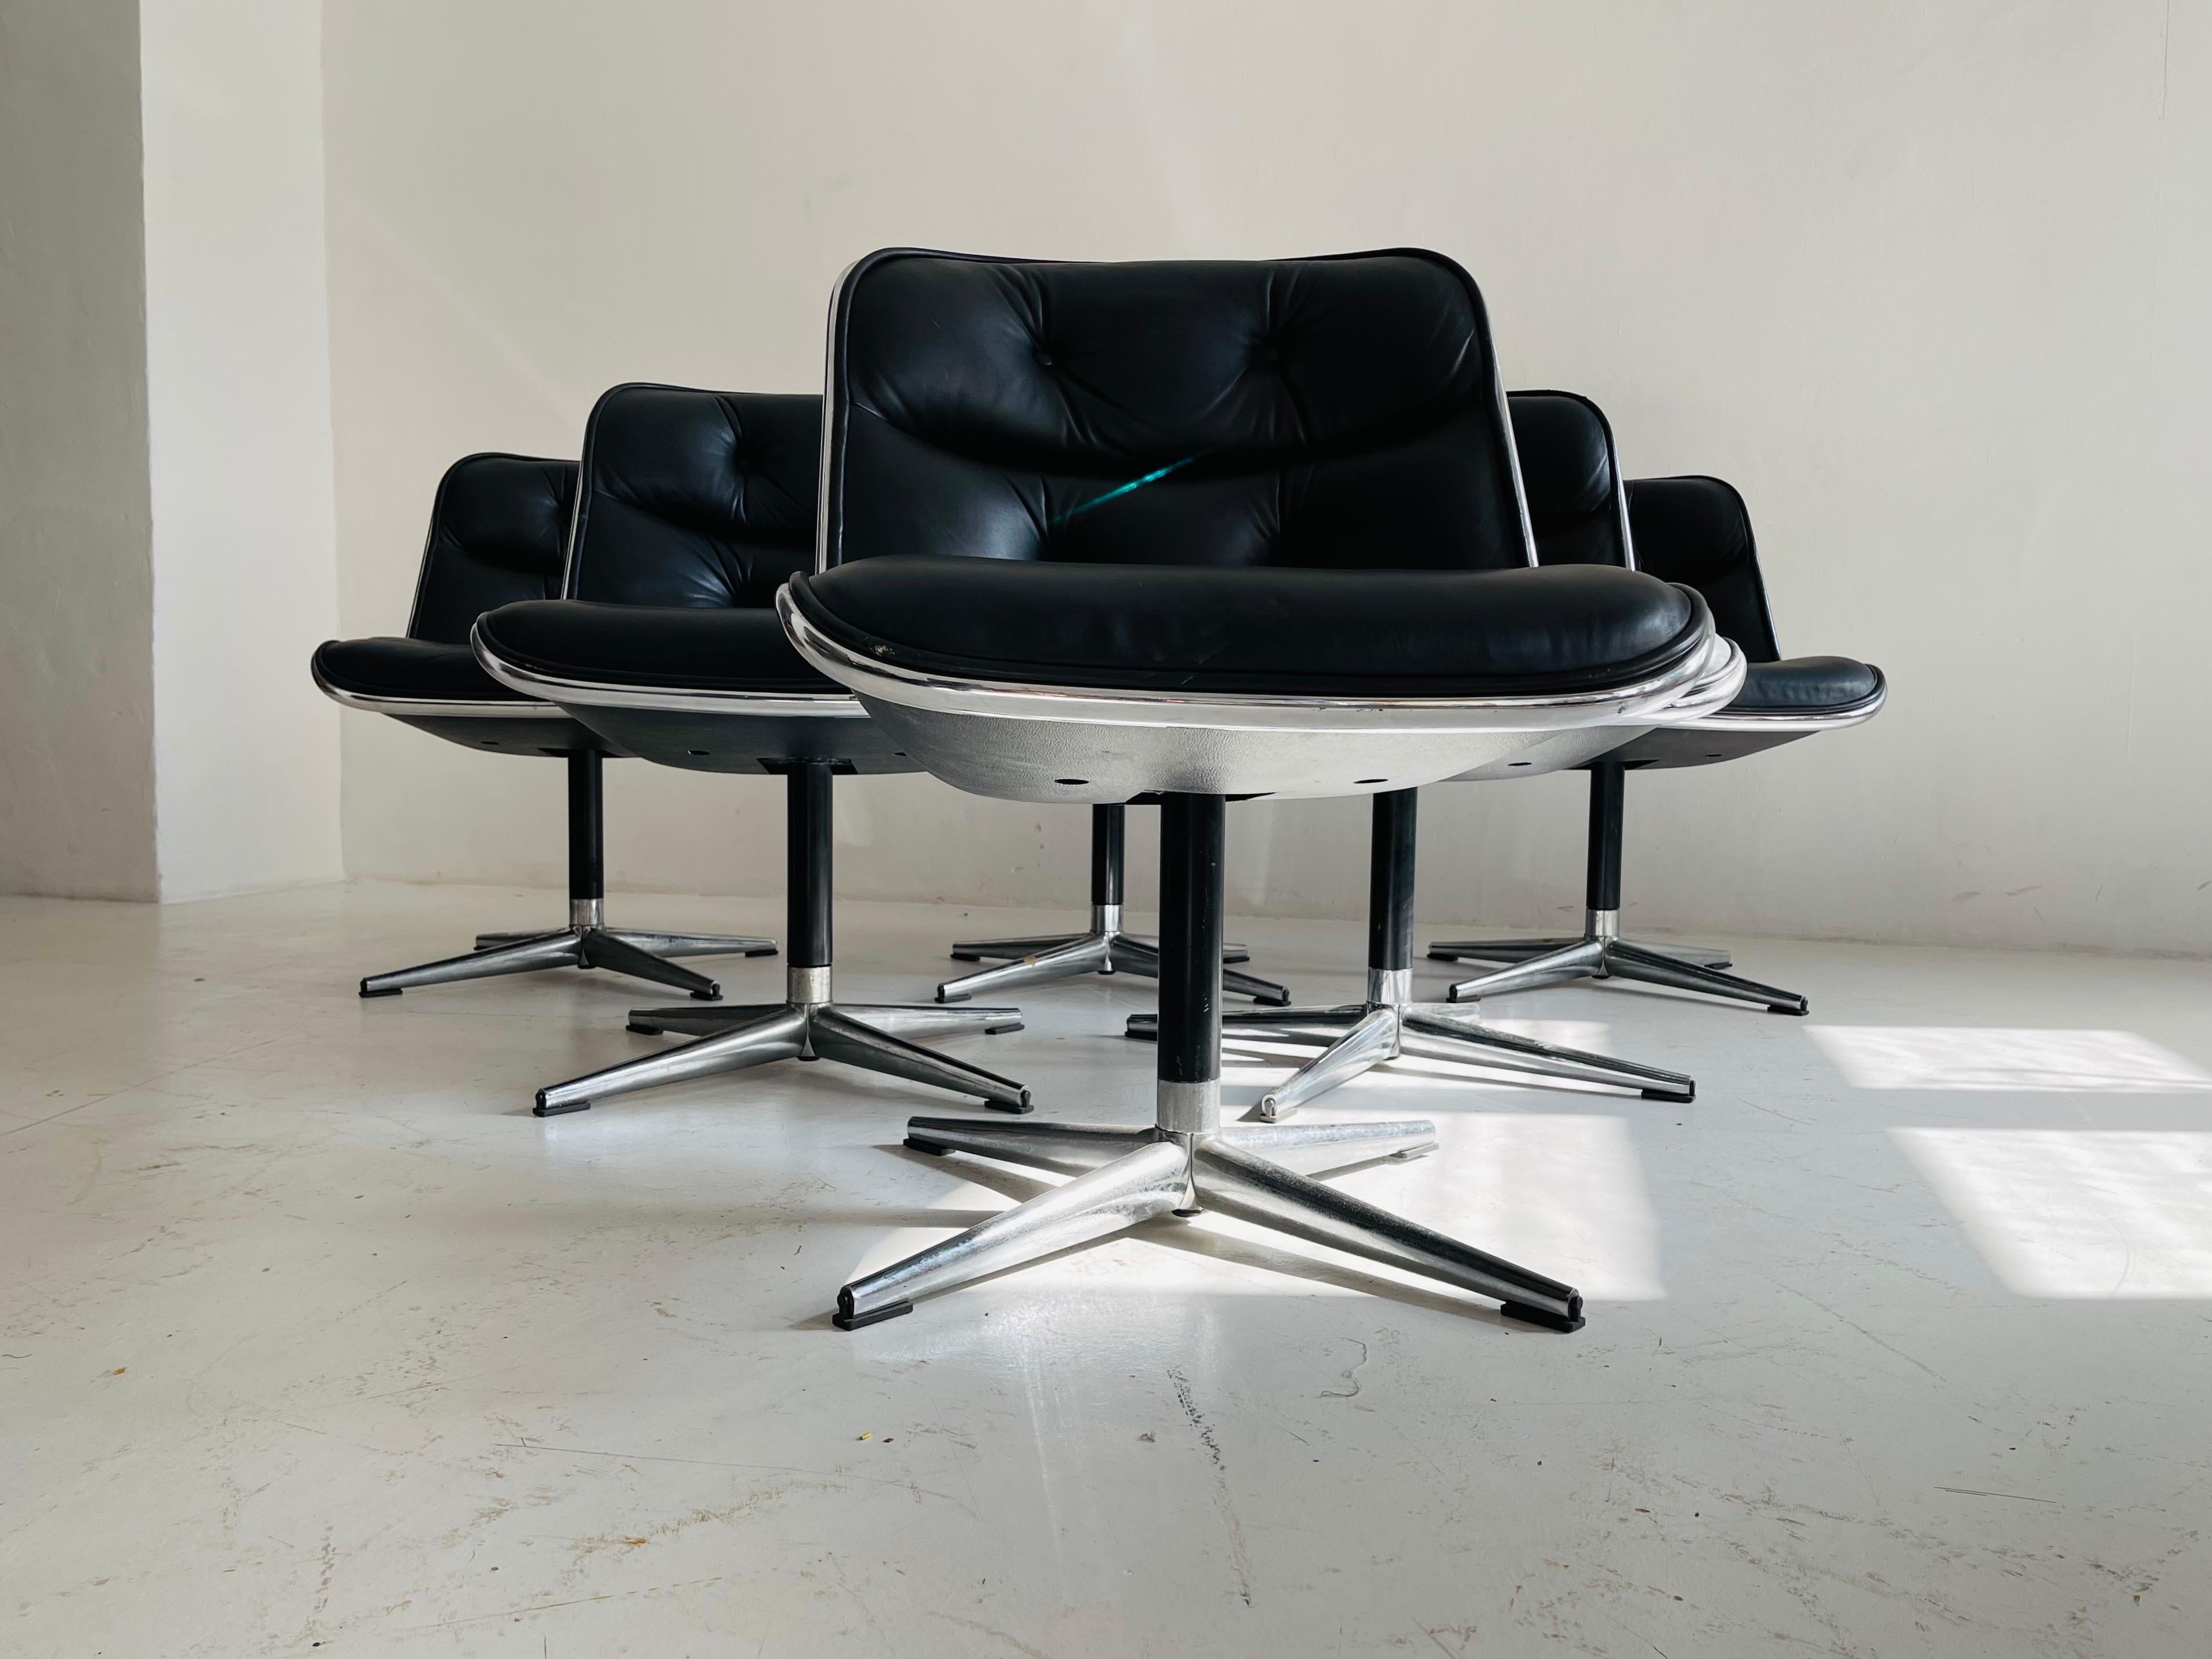 Mid-20th Century Pollack Executive Chair by Charles Pollack for Knoll Set of Six Leather, 1960s For Sale